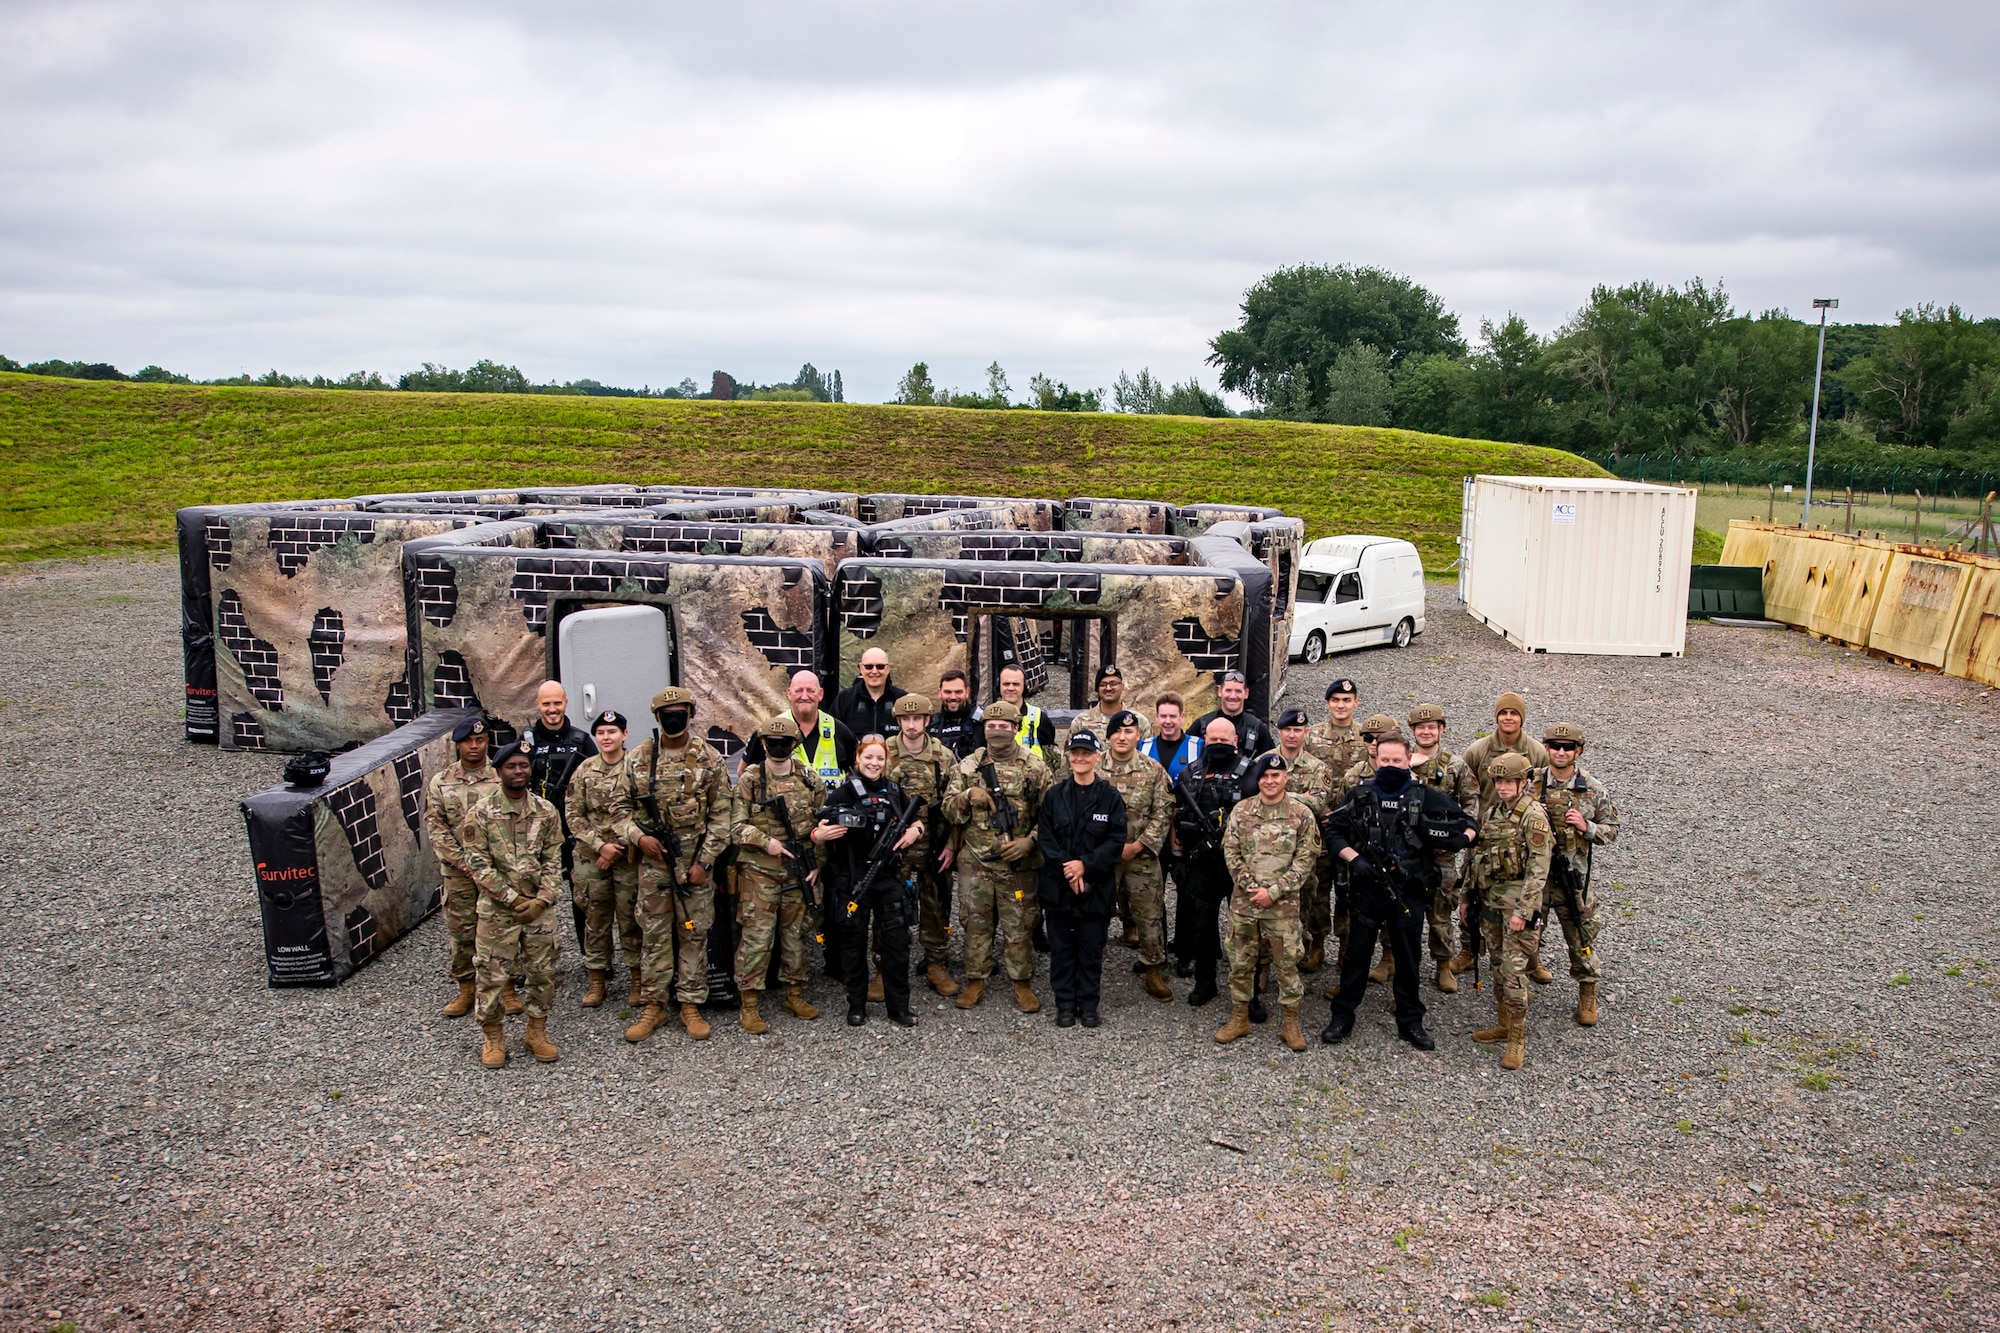 Police Officers from the Northamptonshire Police Department, Ministry of Defense, and Airmen from the 422nd Security Forces Squadron, pose for a group photo during a tri-agency active shooter response exercise at RAF Croughton, England, June 30, 2021. Airmen from the 422nd SFS along with police officers from the NHPD and Ministry of Defense, participated in multiple exercises to enhance their search and seizure tactics, strengthen local ties and gain rapport with their fellow officers. (U.S. Air Force photo by Senior Airman Eugene Oliver)